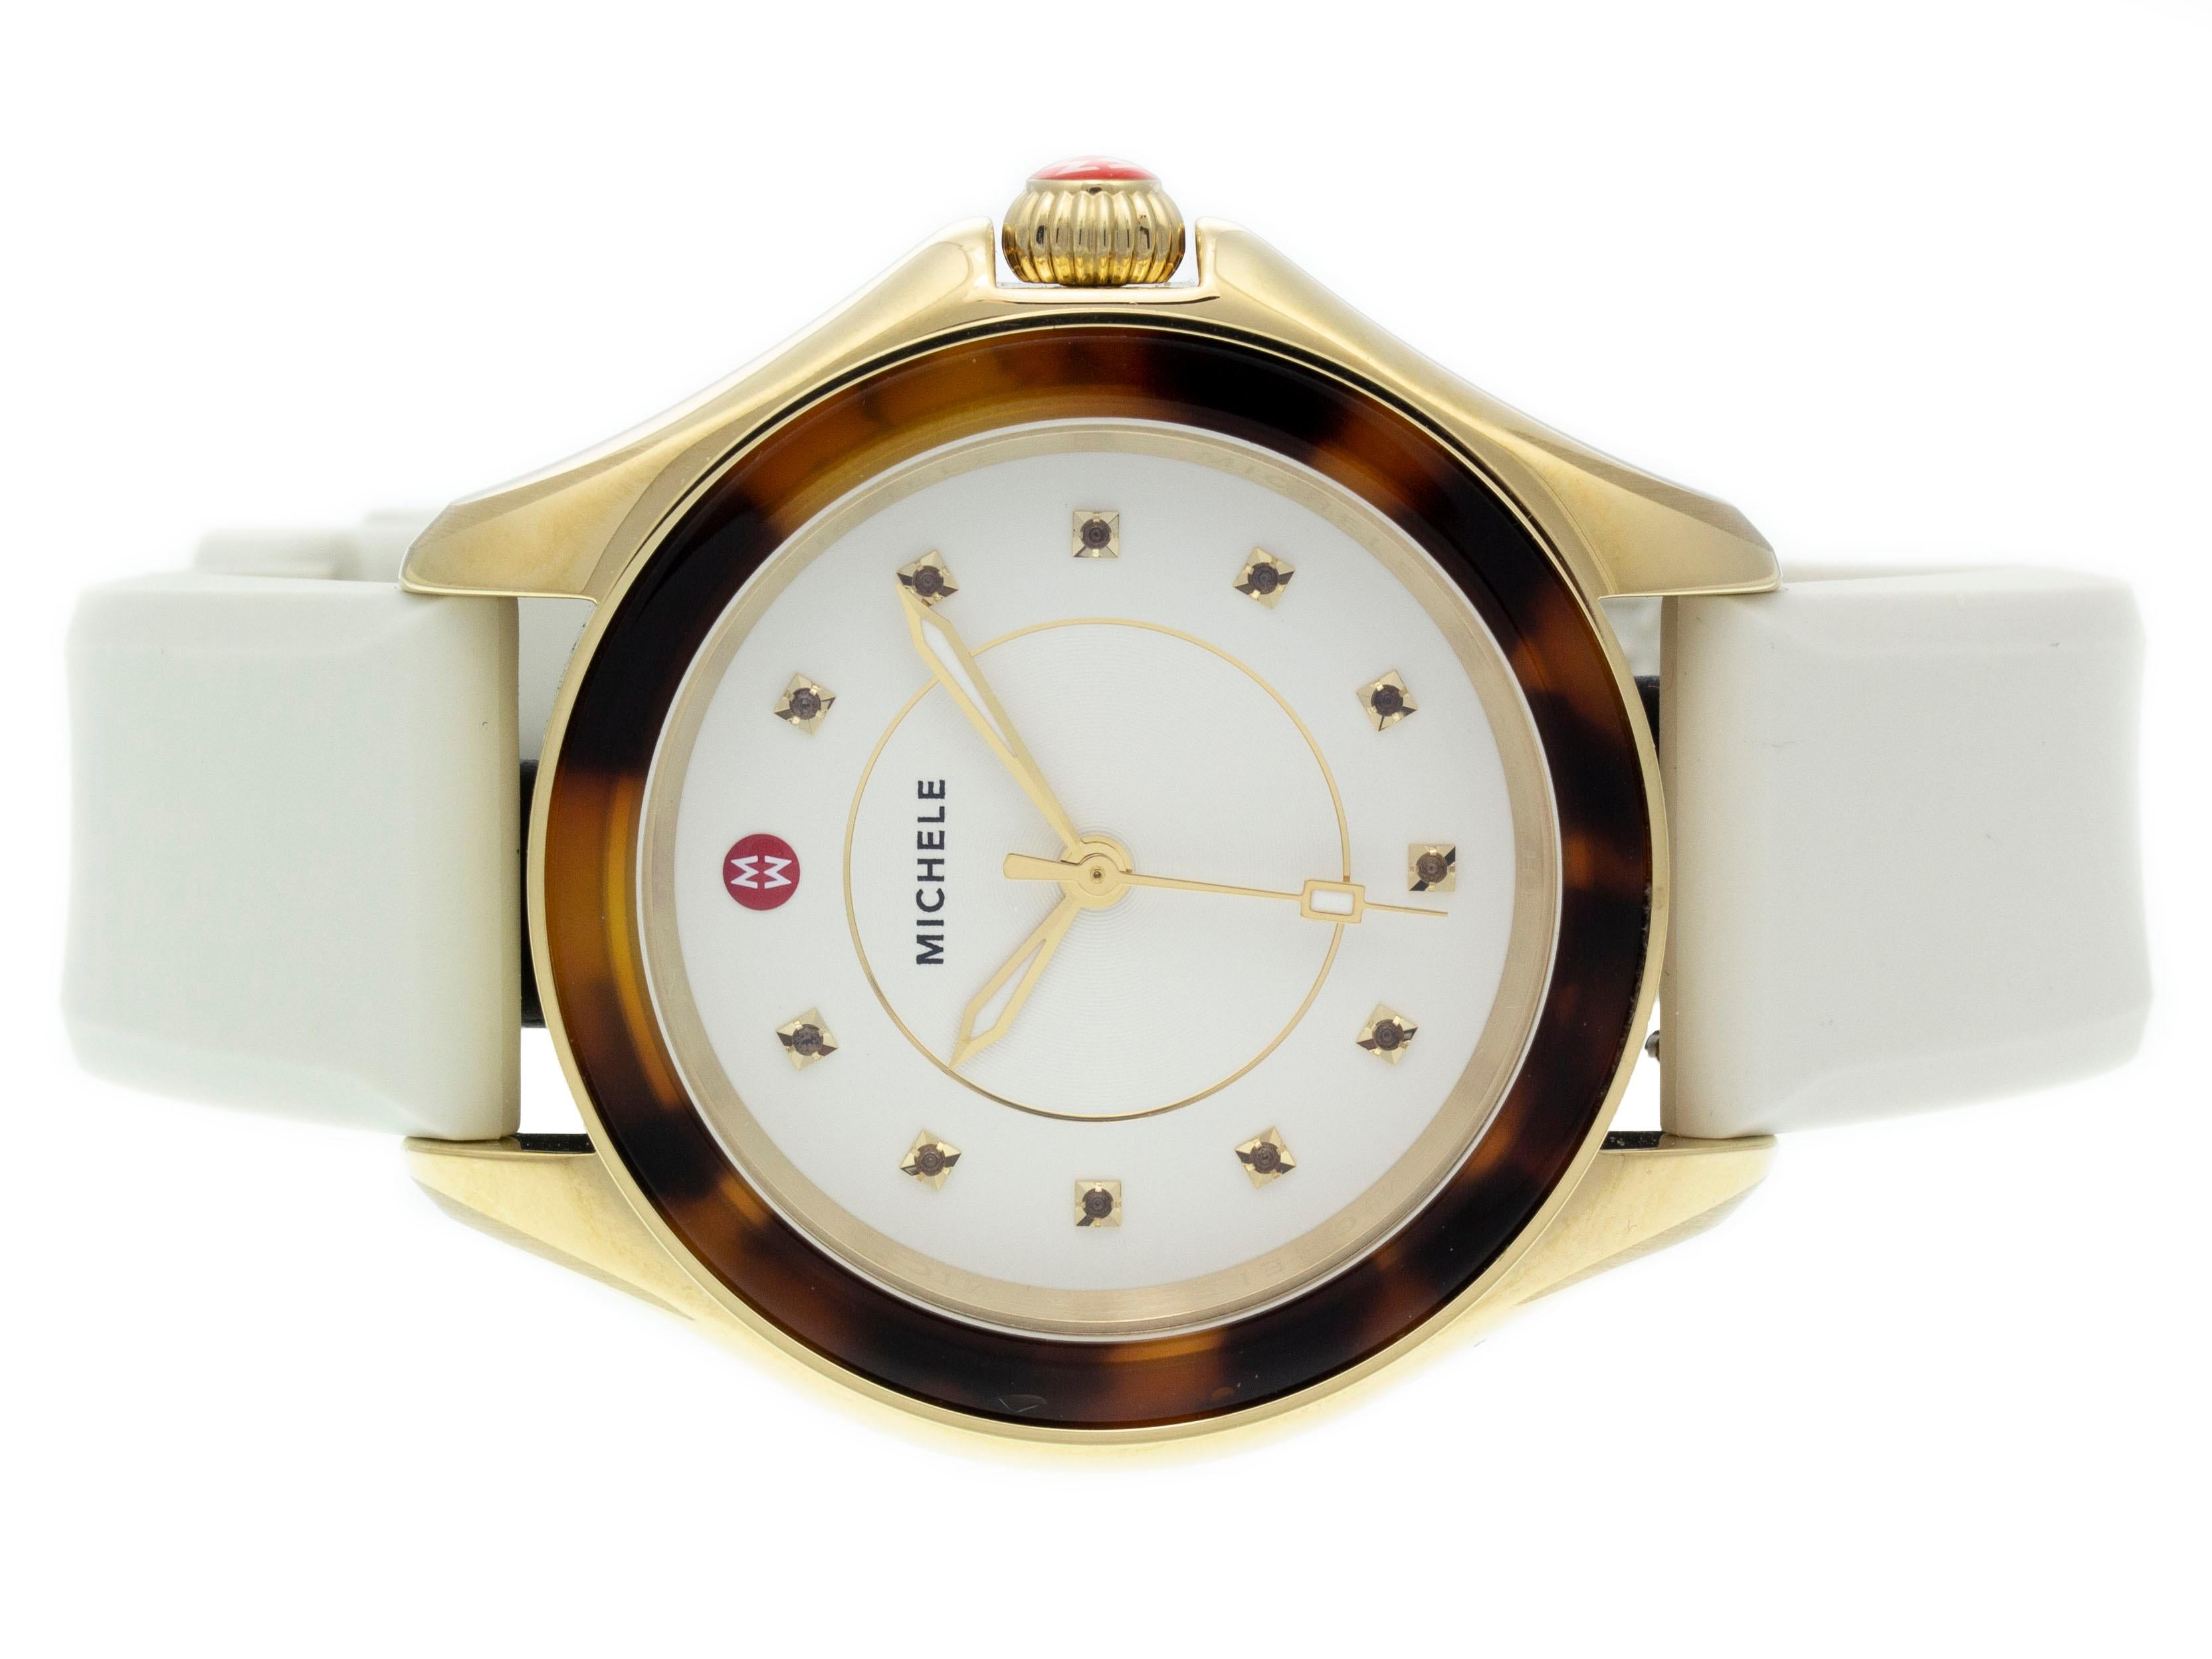 PVD steel Michele Cape quartz watch with a 40mm case, cream dial with topaz indexes, and silicone strap with tang buckle. Features include hours, minutes, and seconds. Comes with a Deluxe Gift Box and 2 Year Store